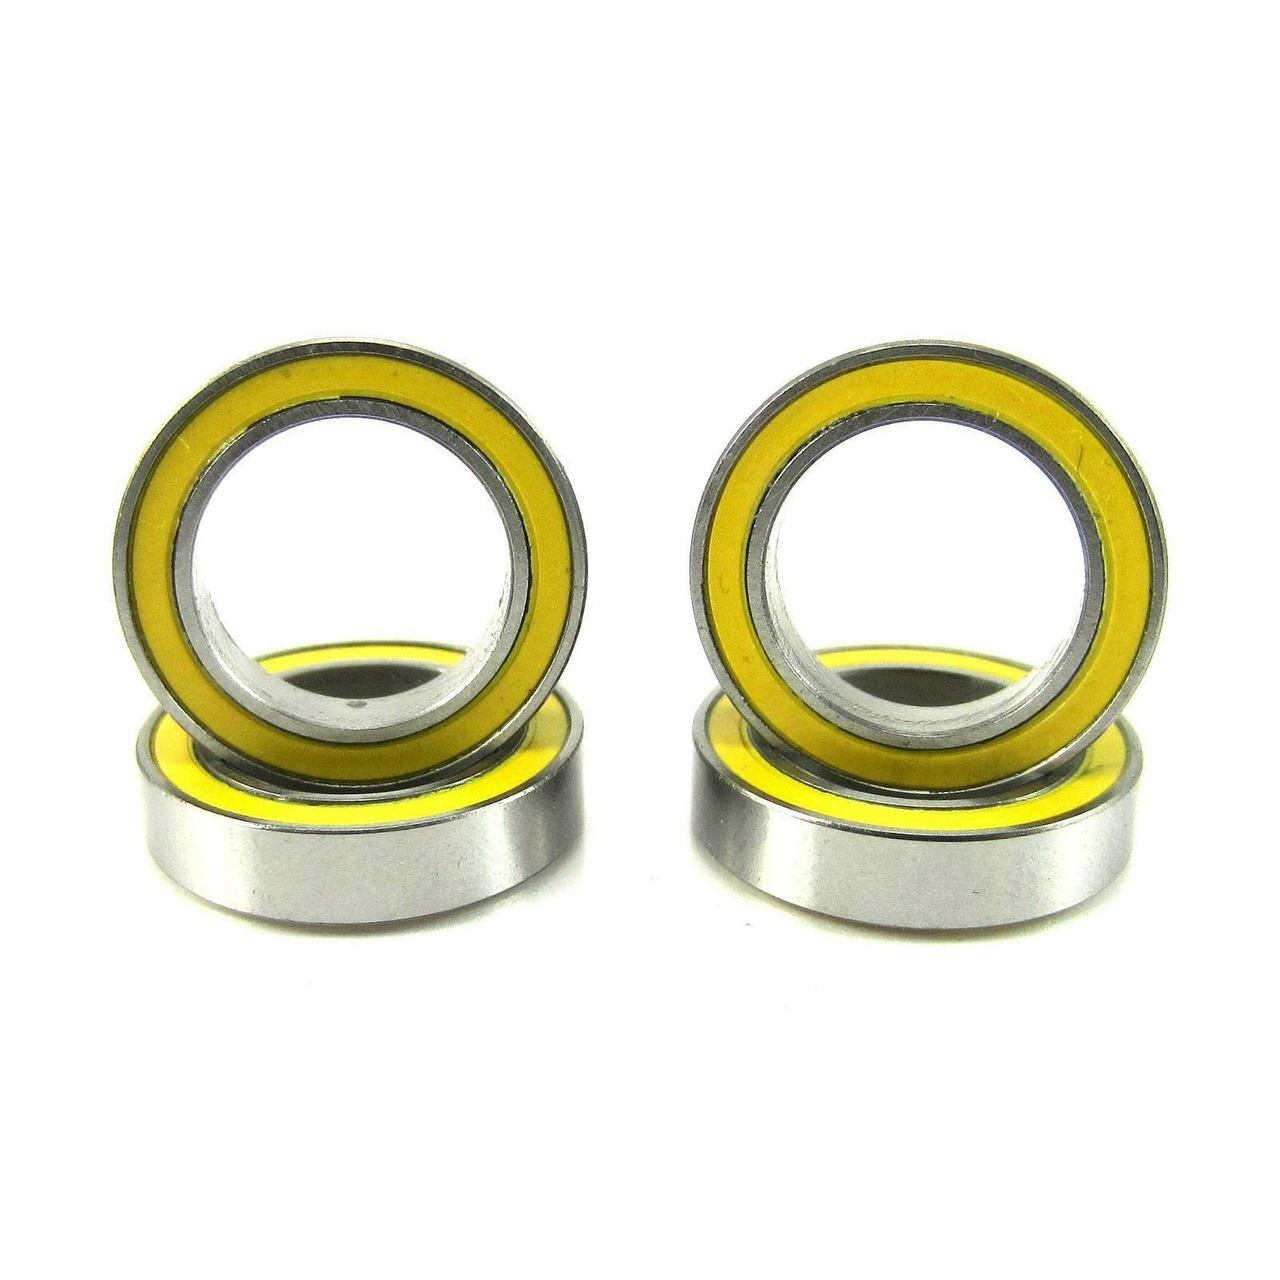 6701-2RS 12x18x4mm Precision High Speed RC Car Ball Bearing, Chrome Steel (GCr15) with Yellow Rubber Seals ABEC-1 ABEC-3 ABEC-5